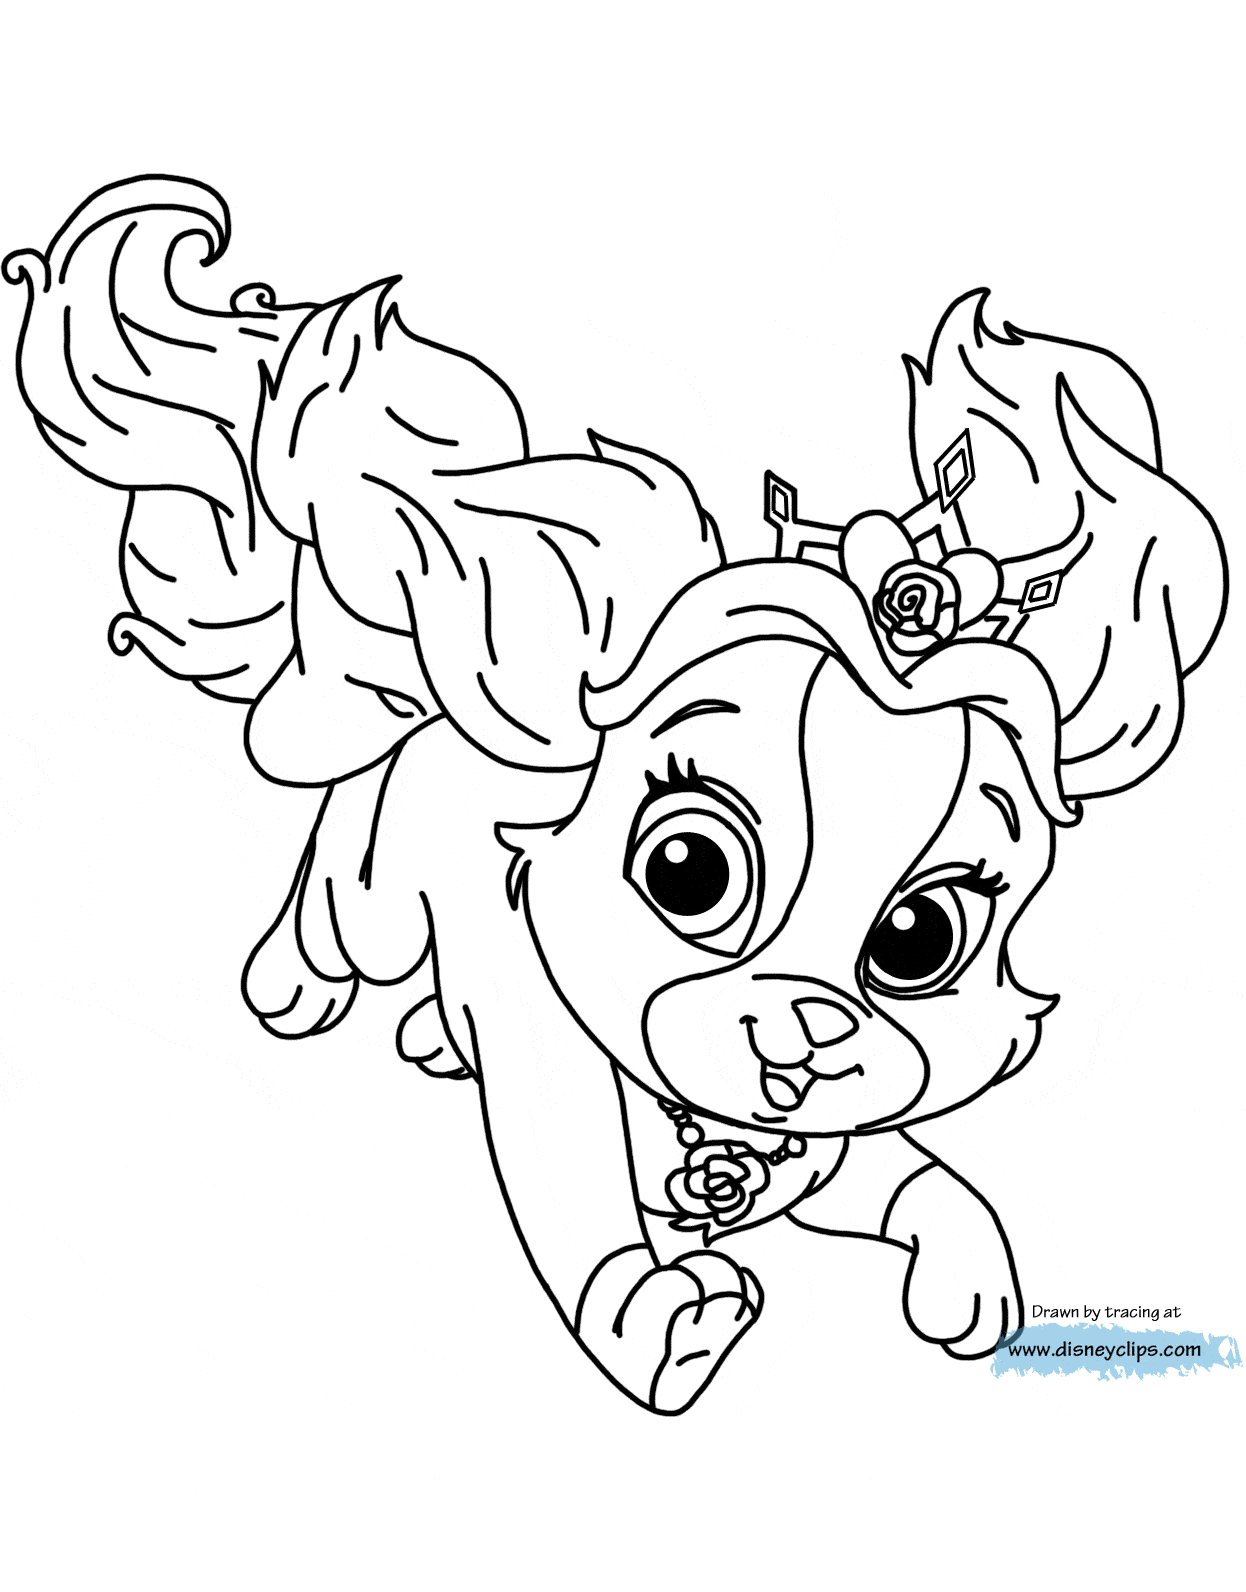 Disney Palace Pets Printable Coloring Pages 3 | Disney ...